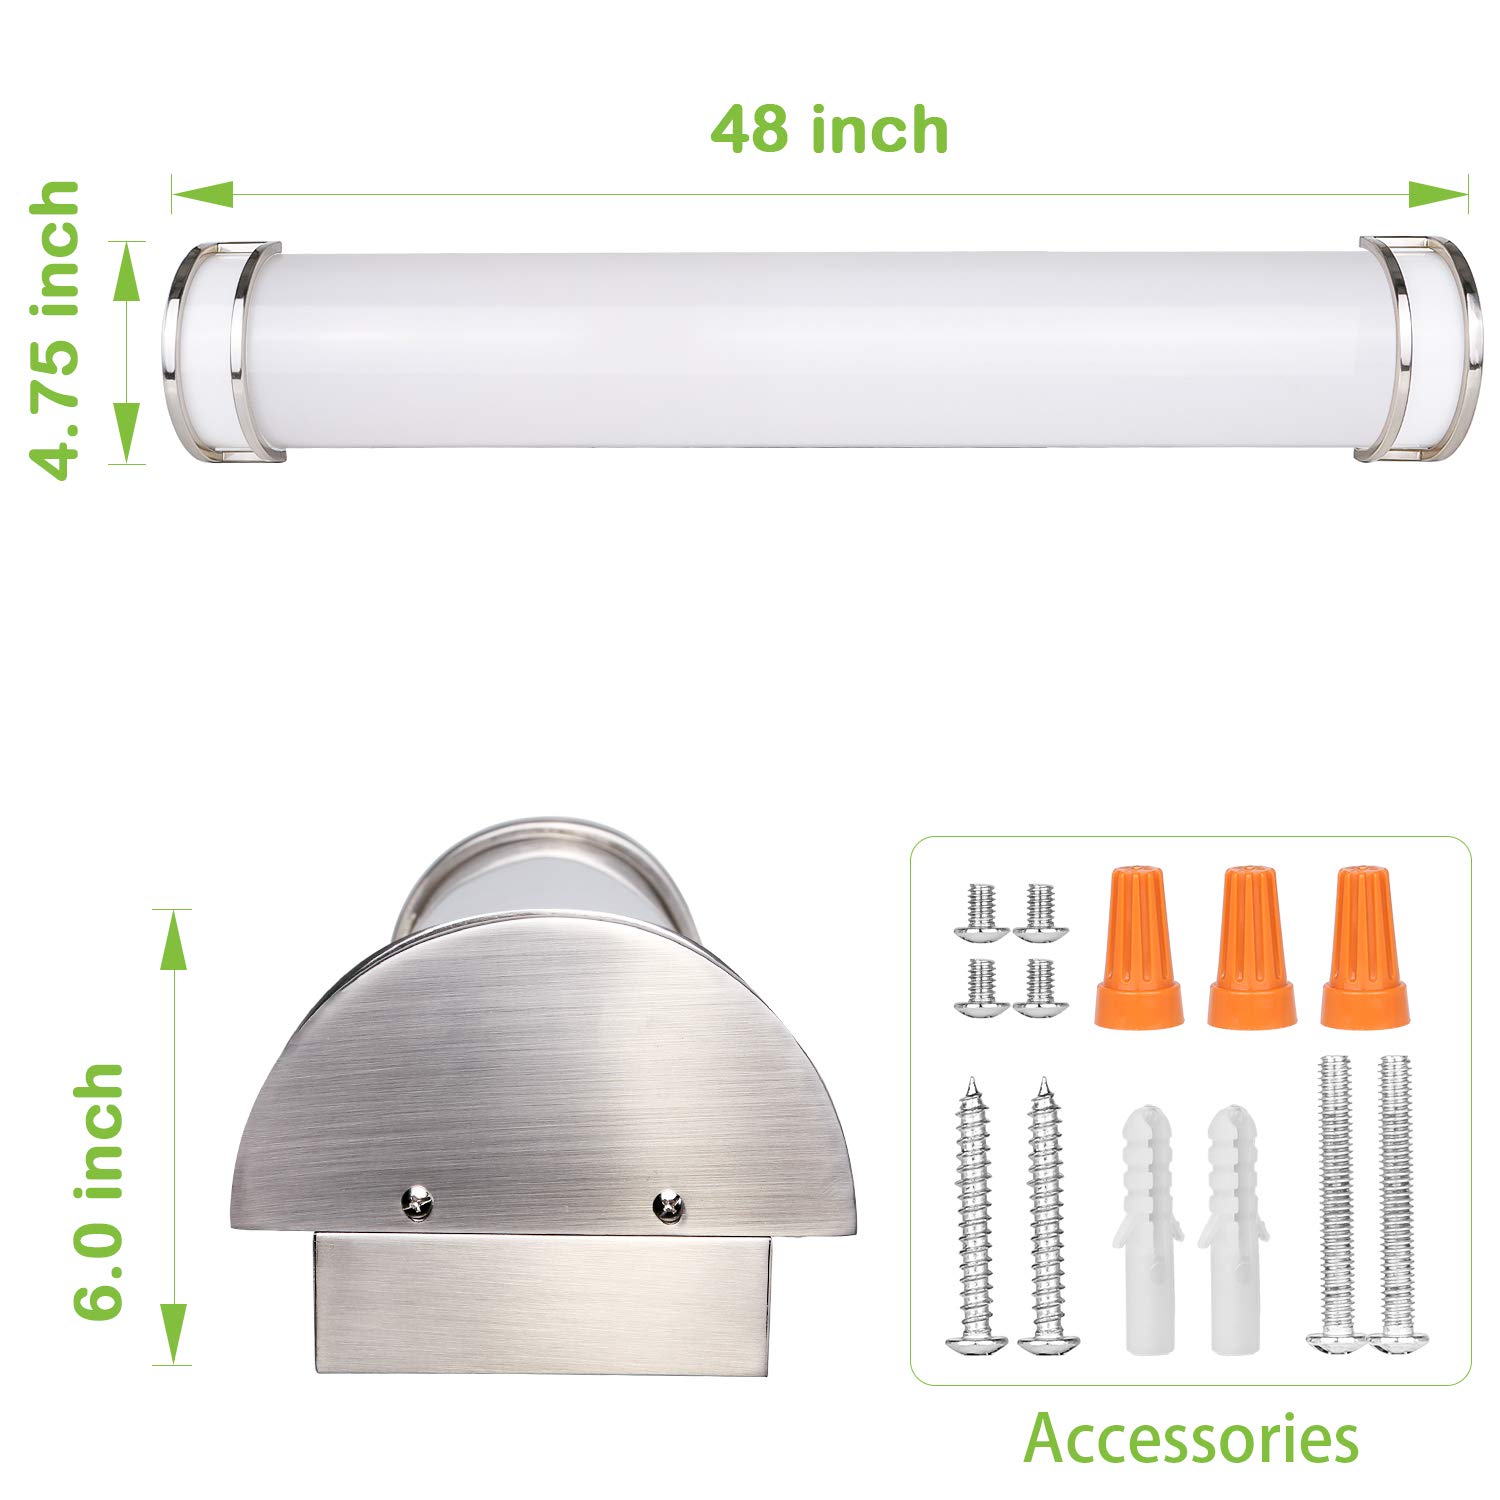 hykolity 48 inch Vanity Light, Upgrated Dimmable Bathroom Lighting Fixtures with Brush Nickel Finished, 35W (250 watt Equivalent) Integrated LED Wall Mount Lights, ETL Listed